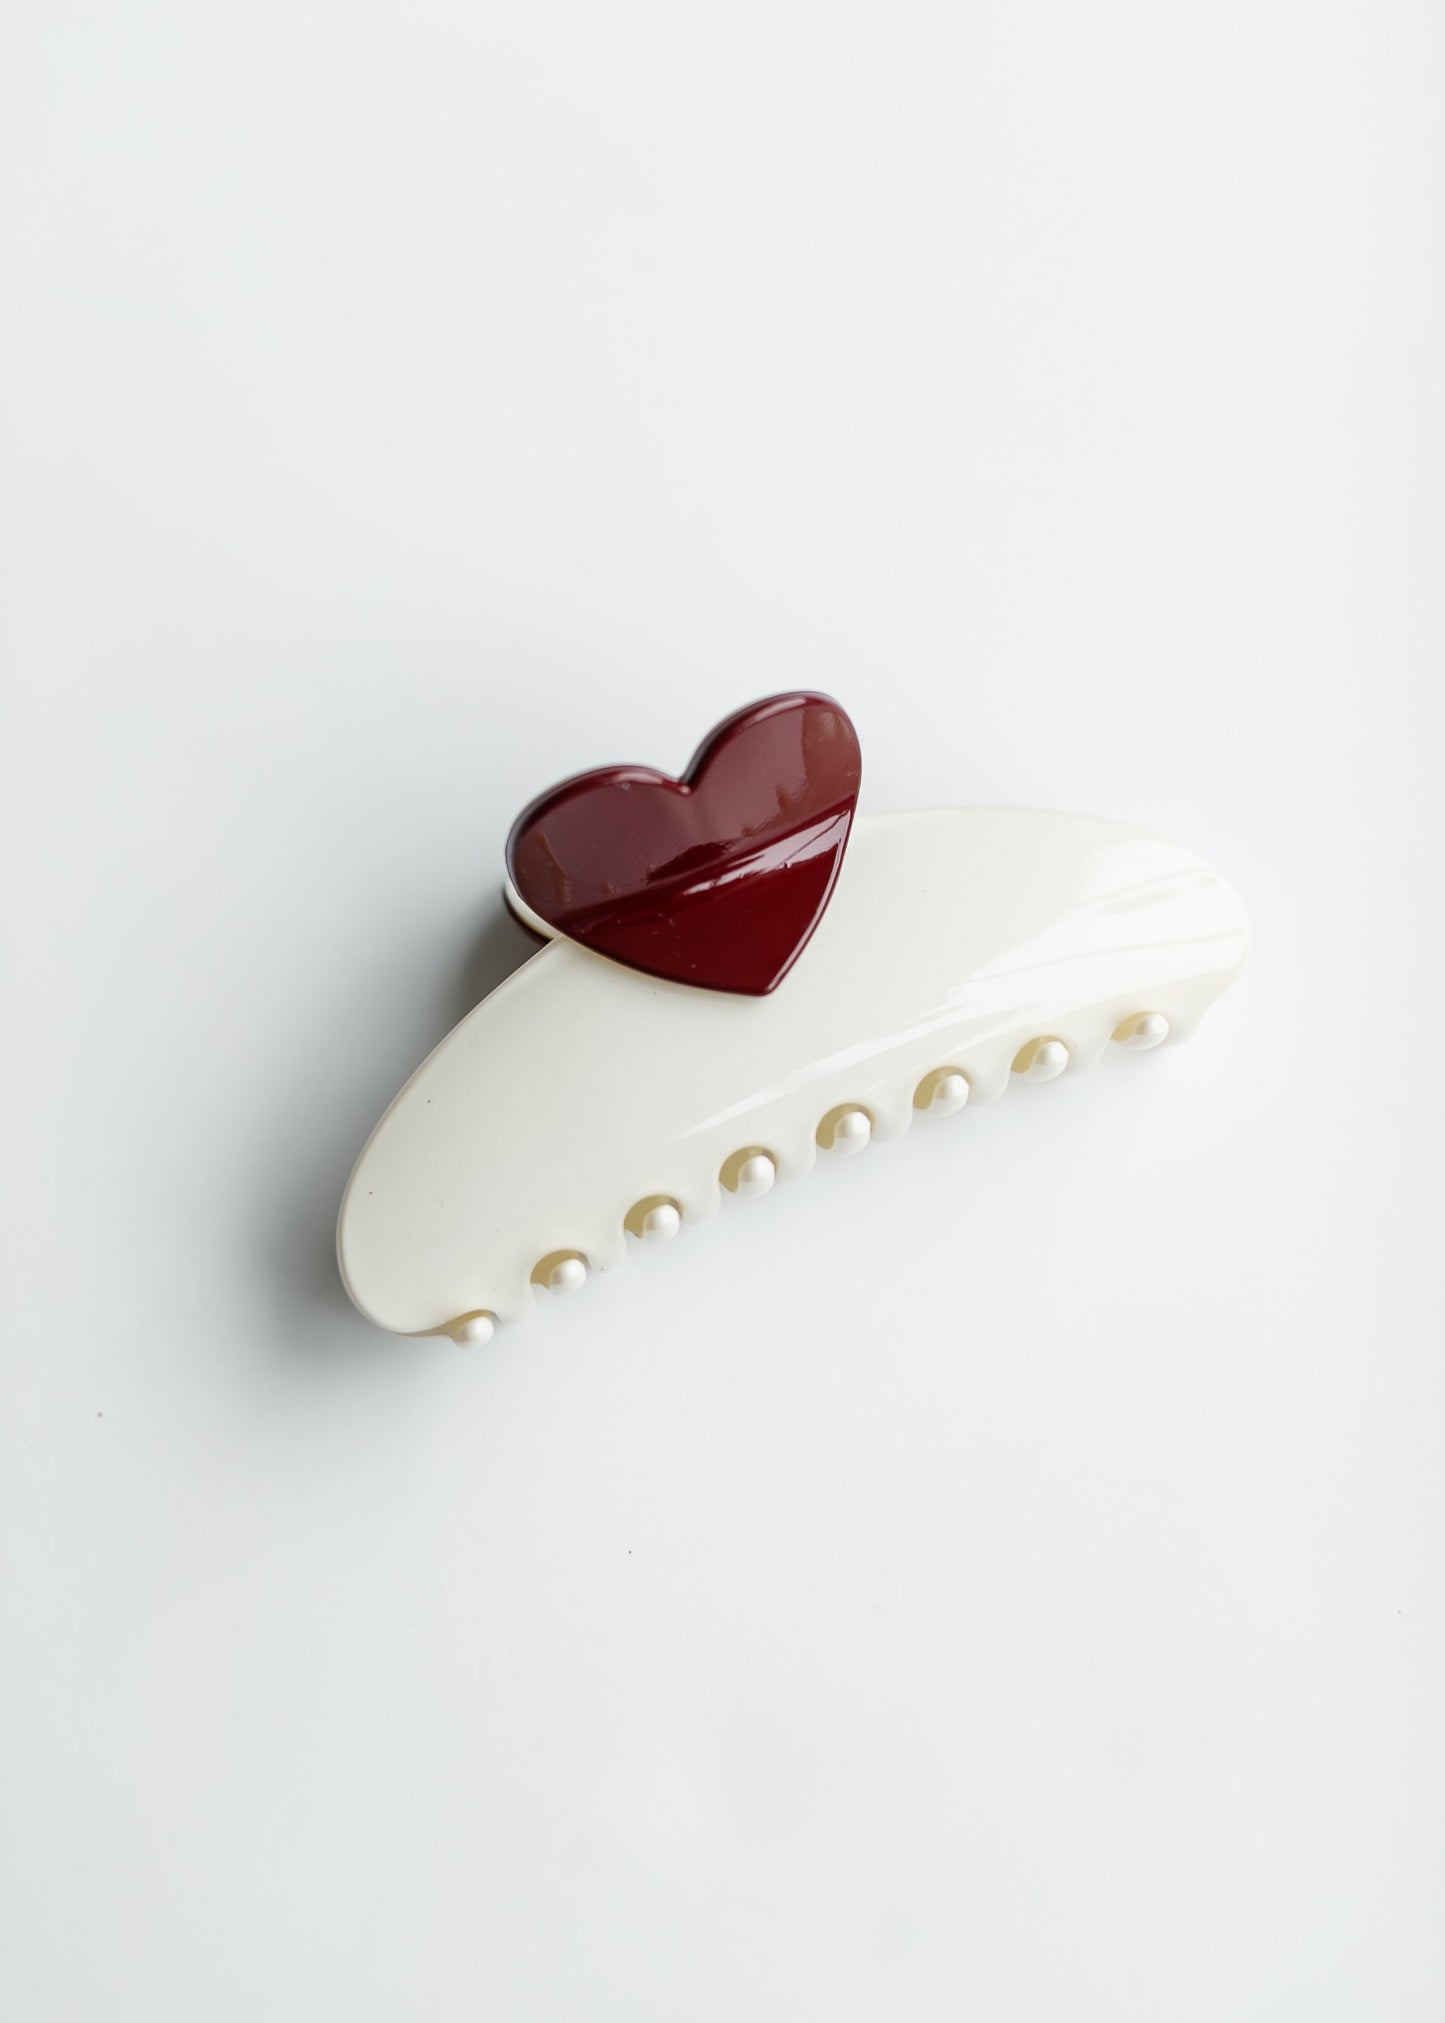 Jumbo Size Heart Hair Claw Clip Accessories White